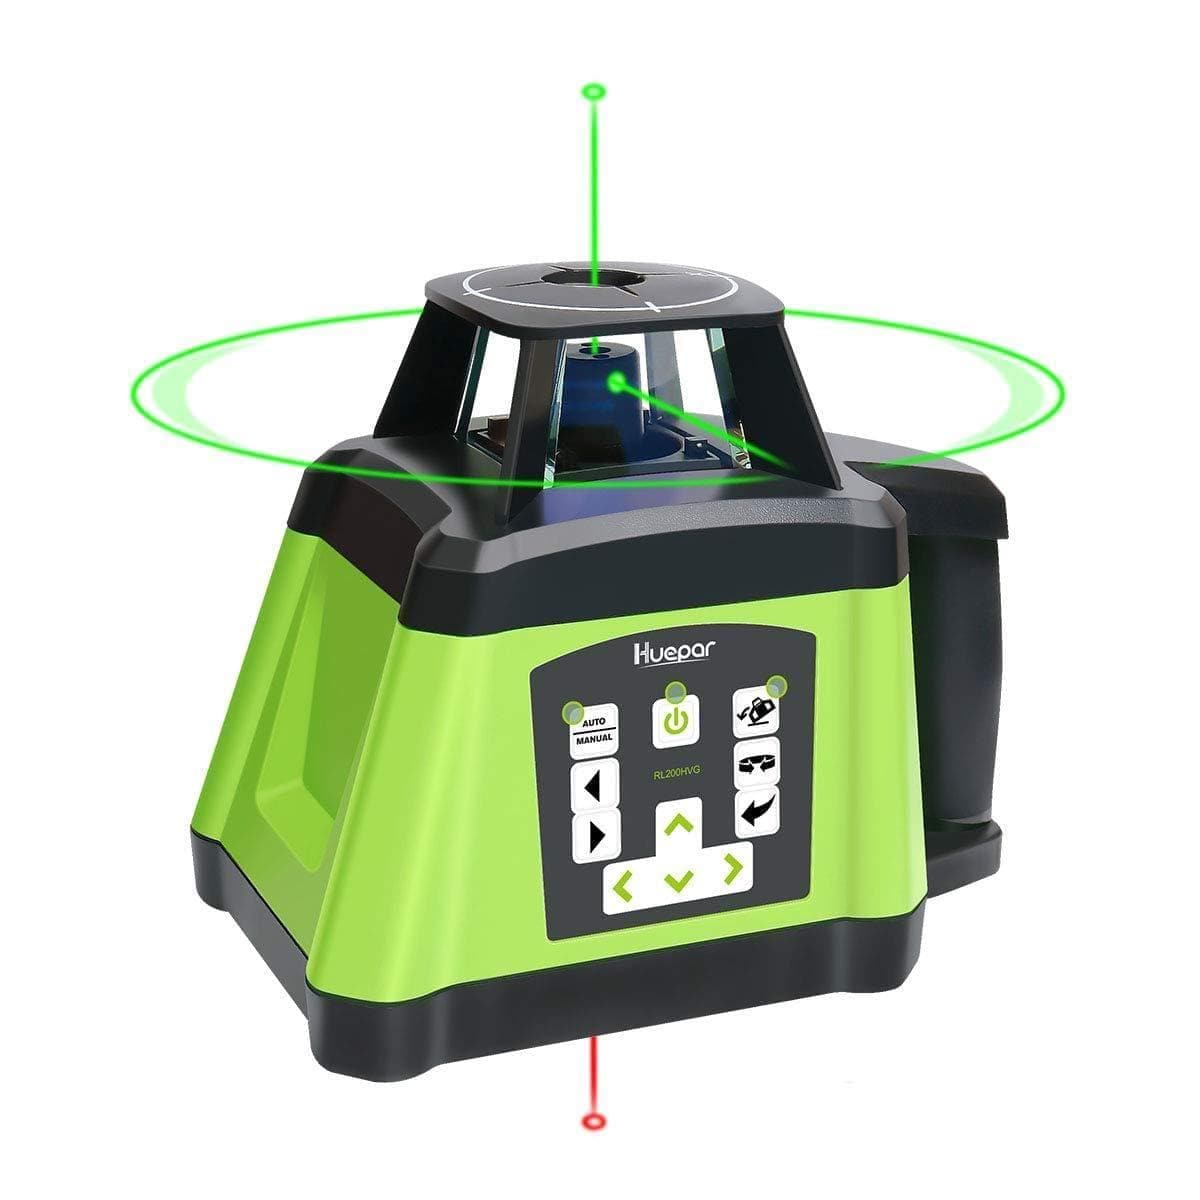 Rotary Laser Levels, How To Use Rotary Laser Levels, Rotating Laser Level